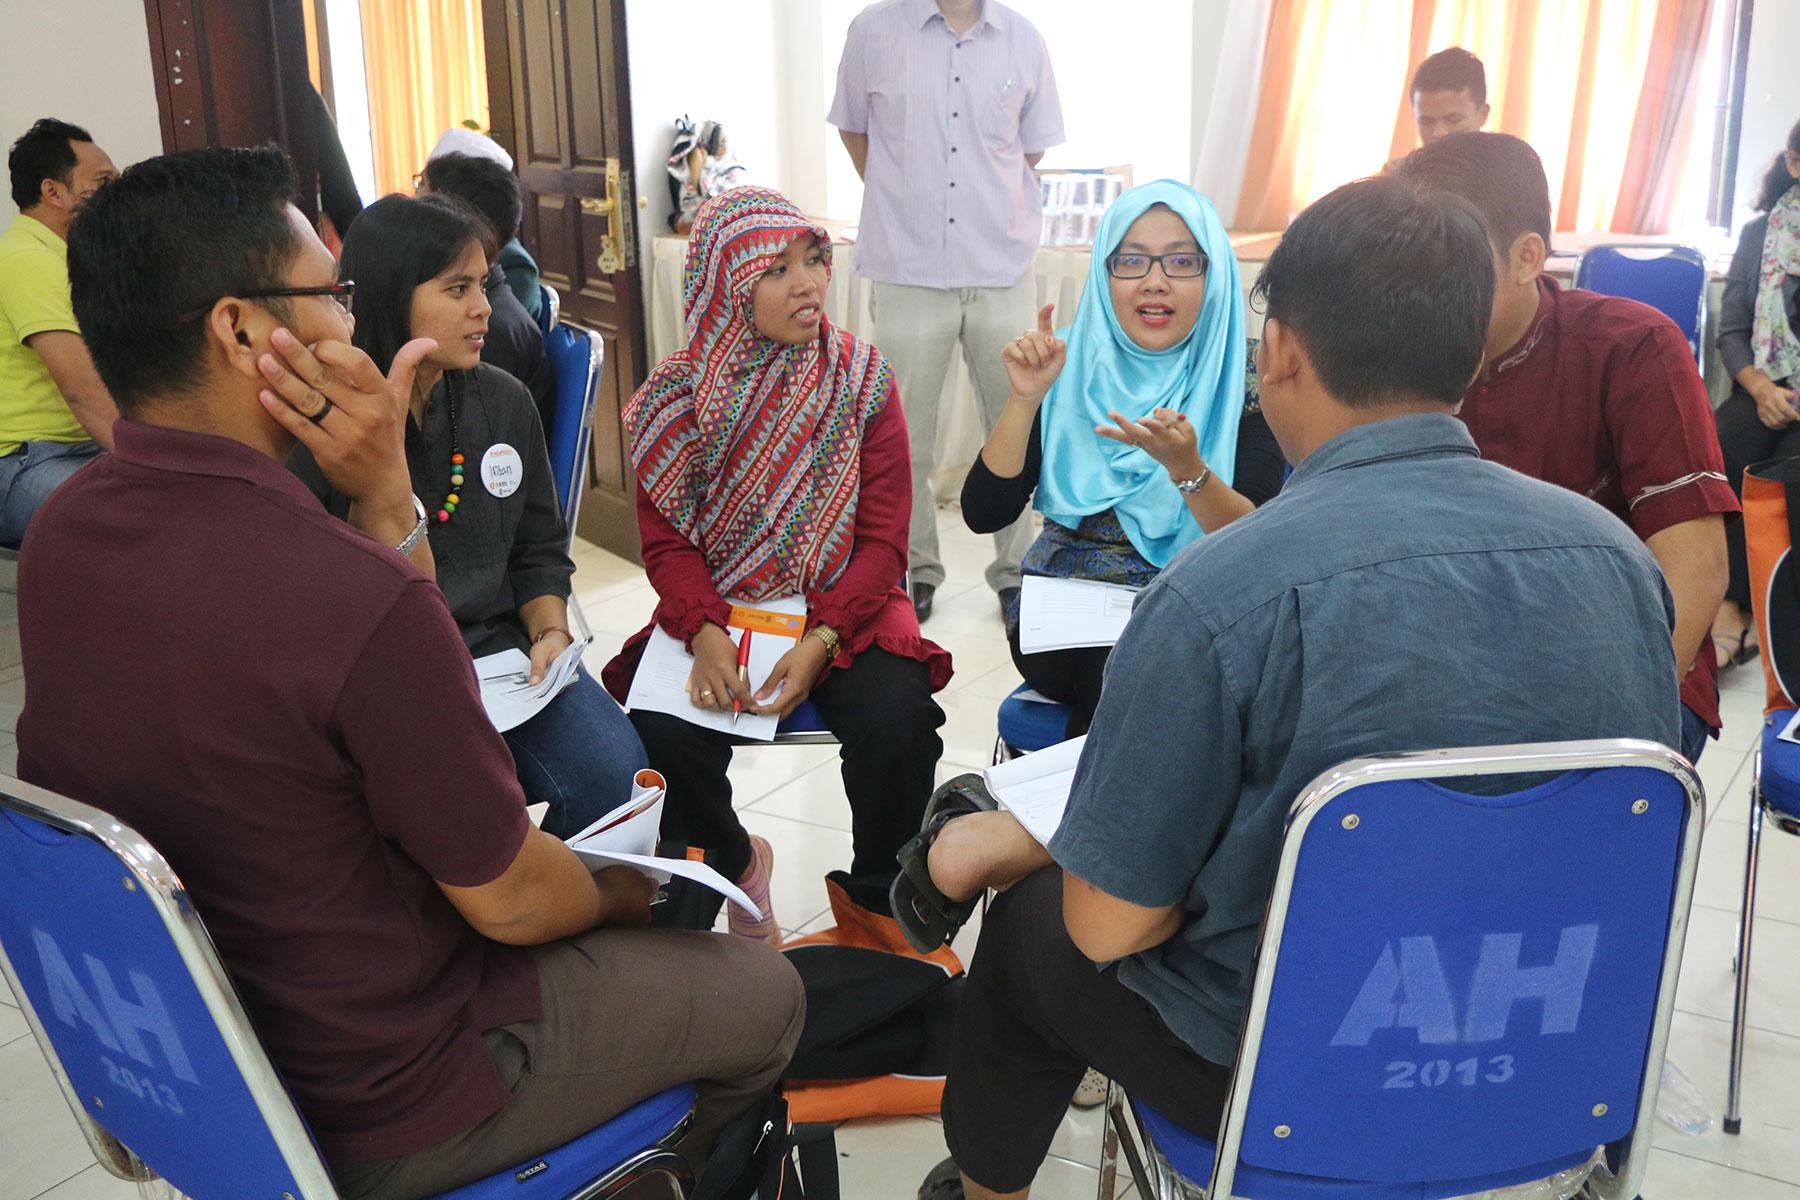 Young Christians and Muslims take part in an interfaith engagement training session in Medan, Indonesia. Photo: A. Yaqin